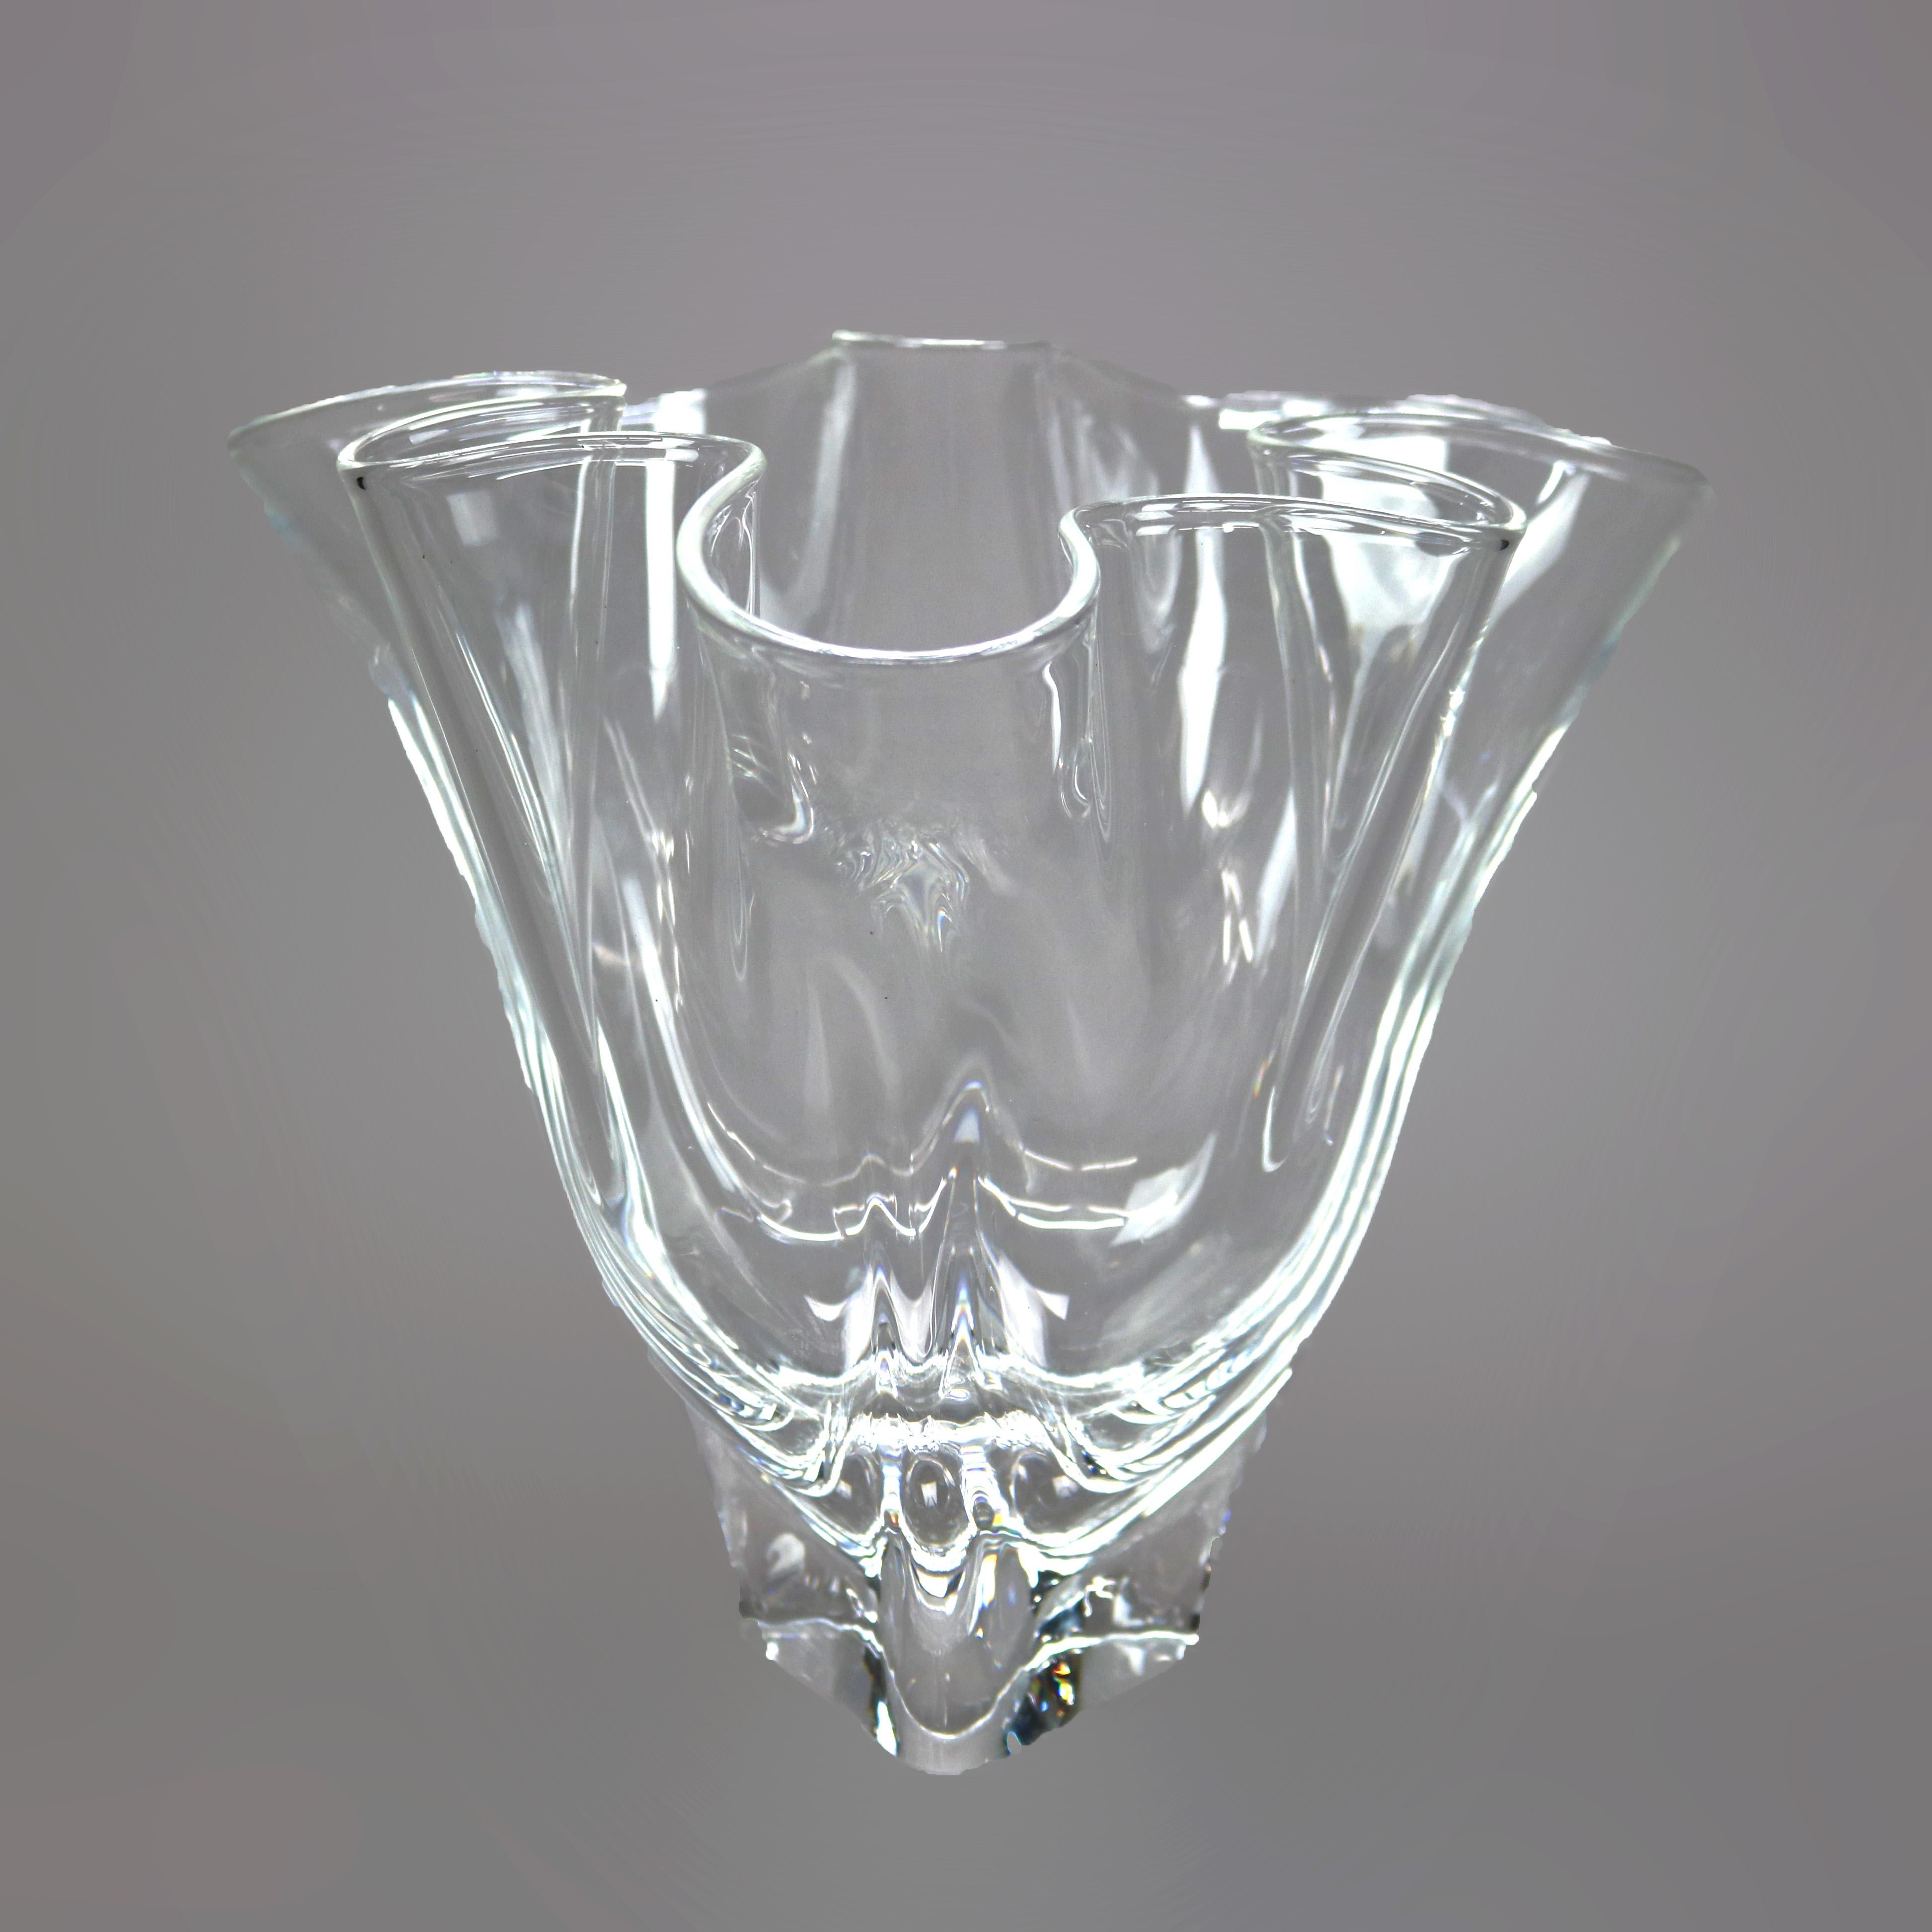 An antique vase by Steuben offers art glass construction in ruffled handkerchief form, signed on base as photographed, c1930

Measures - 8.5'' H x 10'' W x 10'' D.